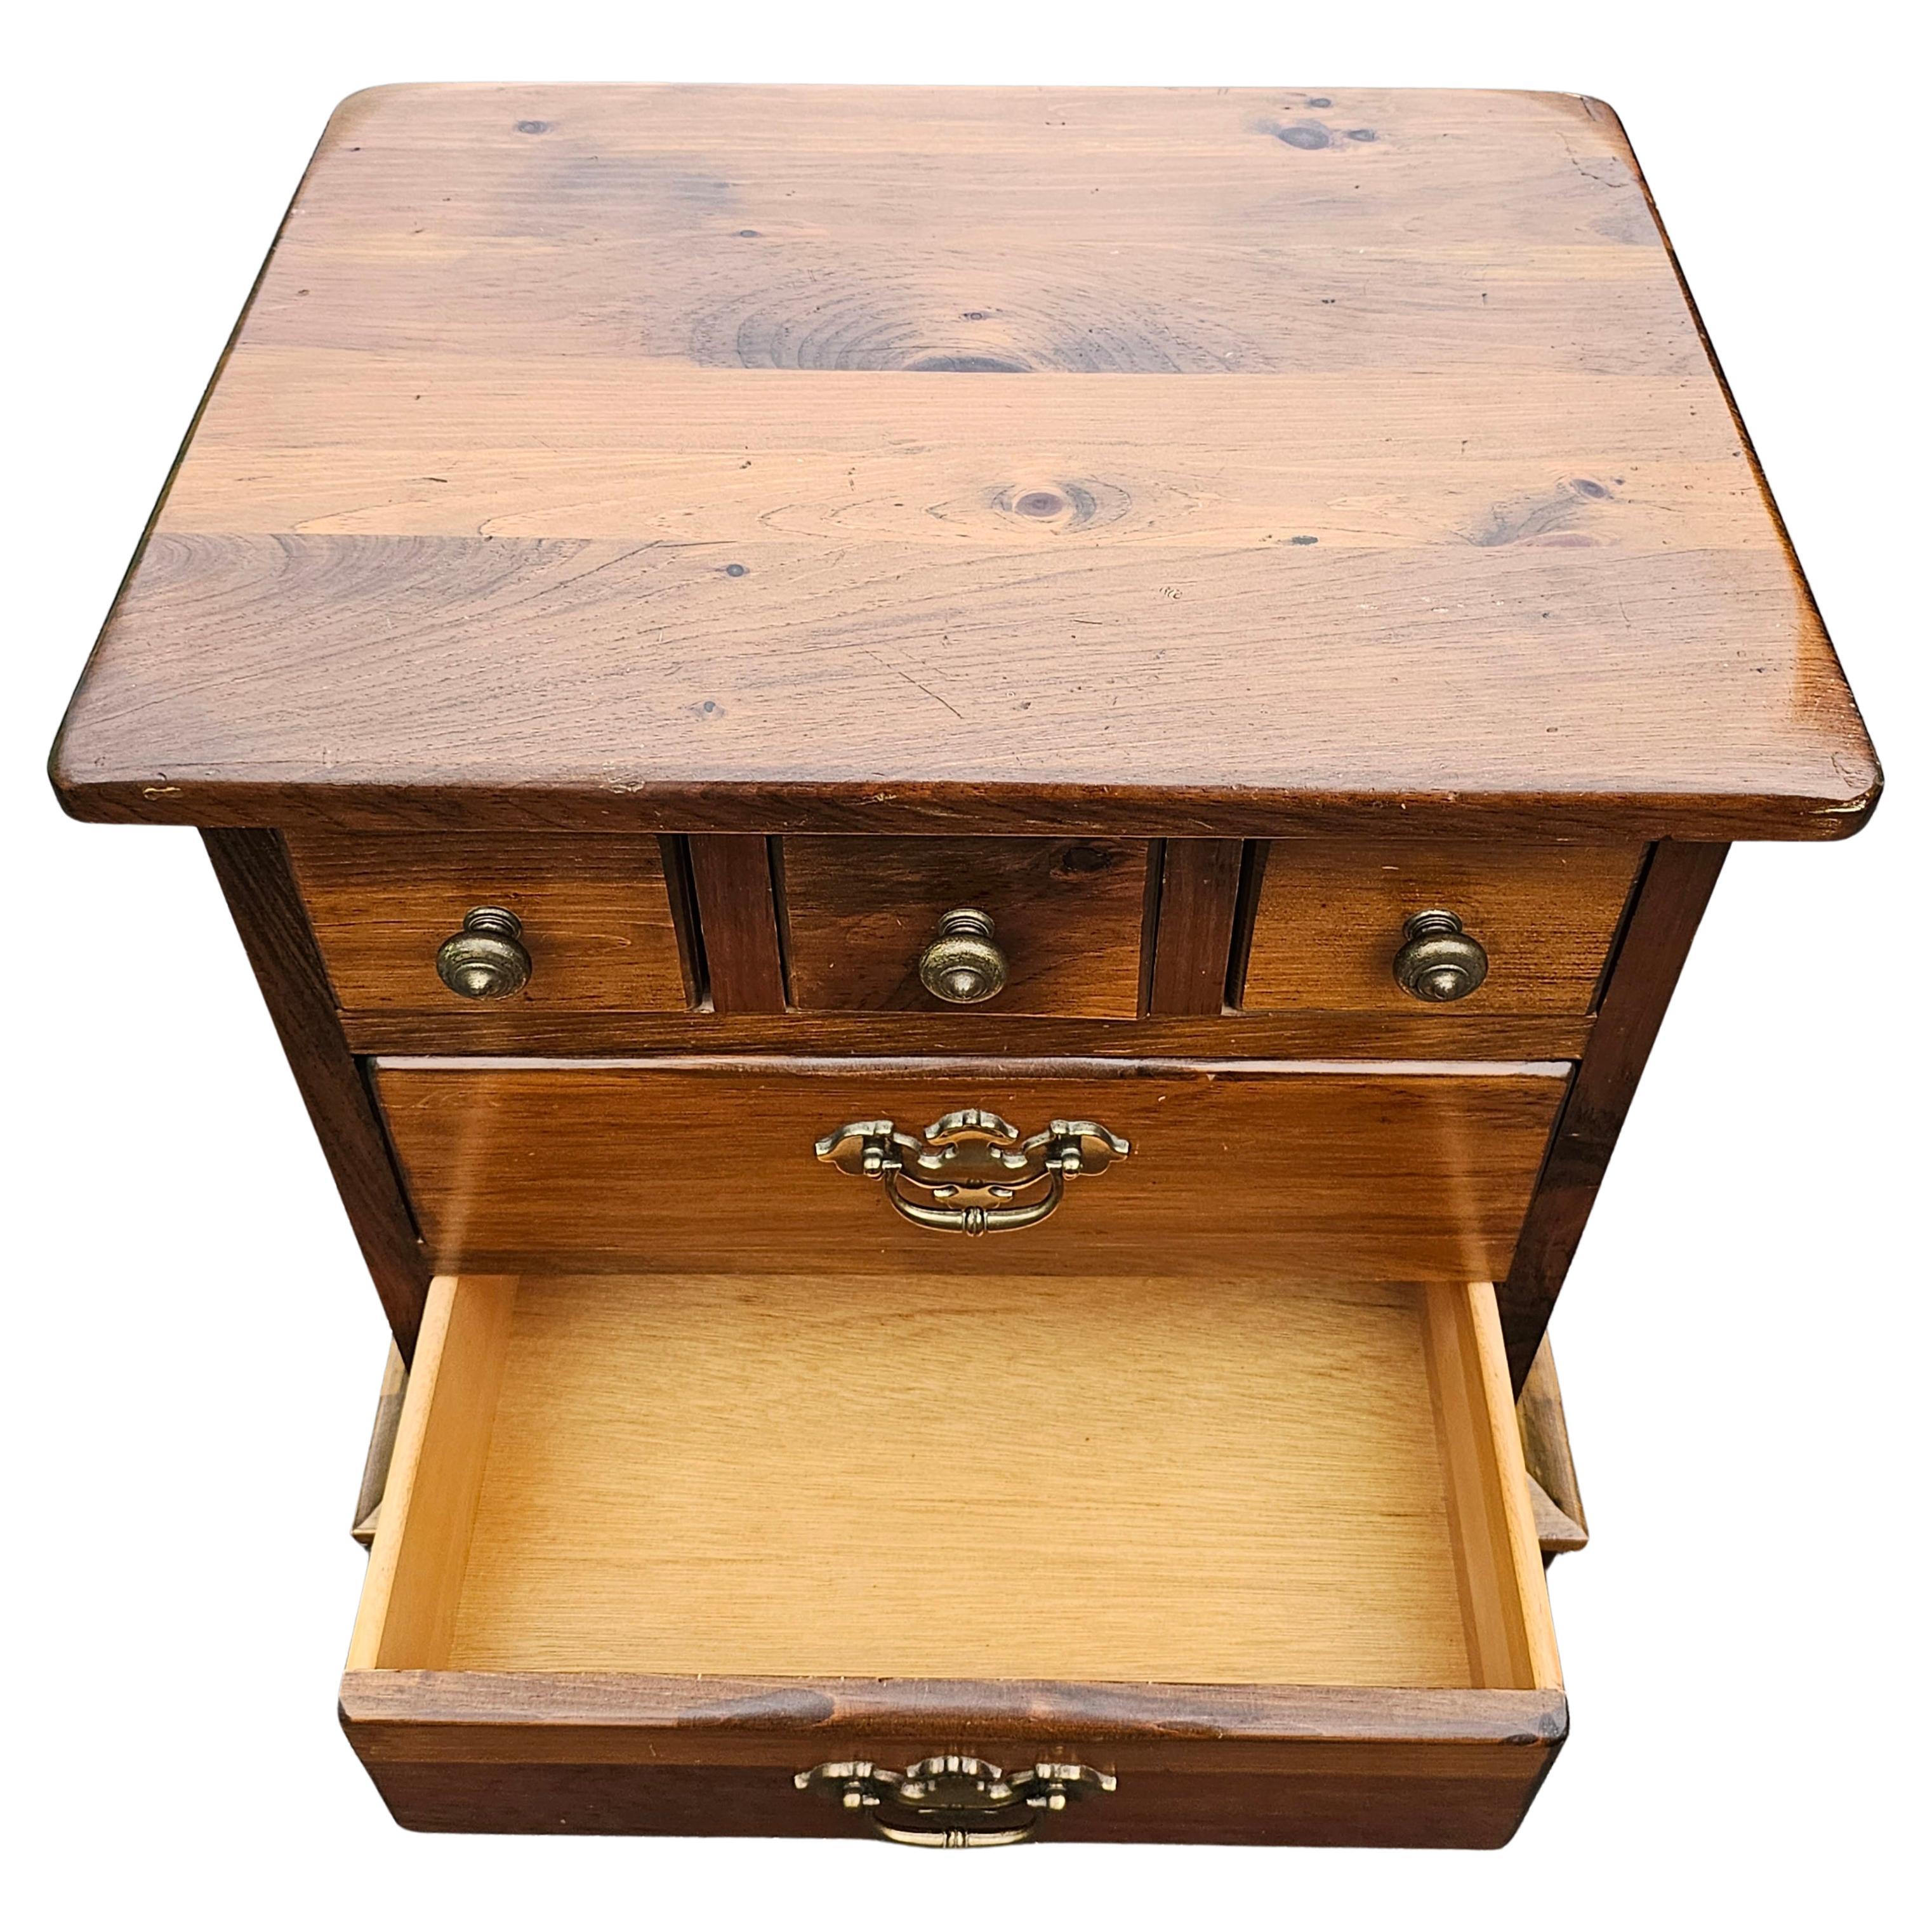 A Mid-20th Century Solid Pine Five-Drawer Bed Side Table Nighstand finished on all sides, Features 3 small top drawers and large lower drawers. Measures 22.5